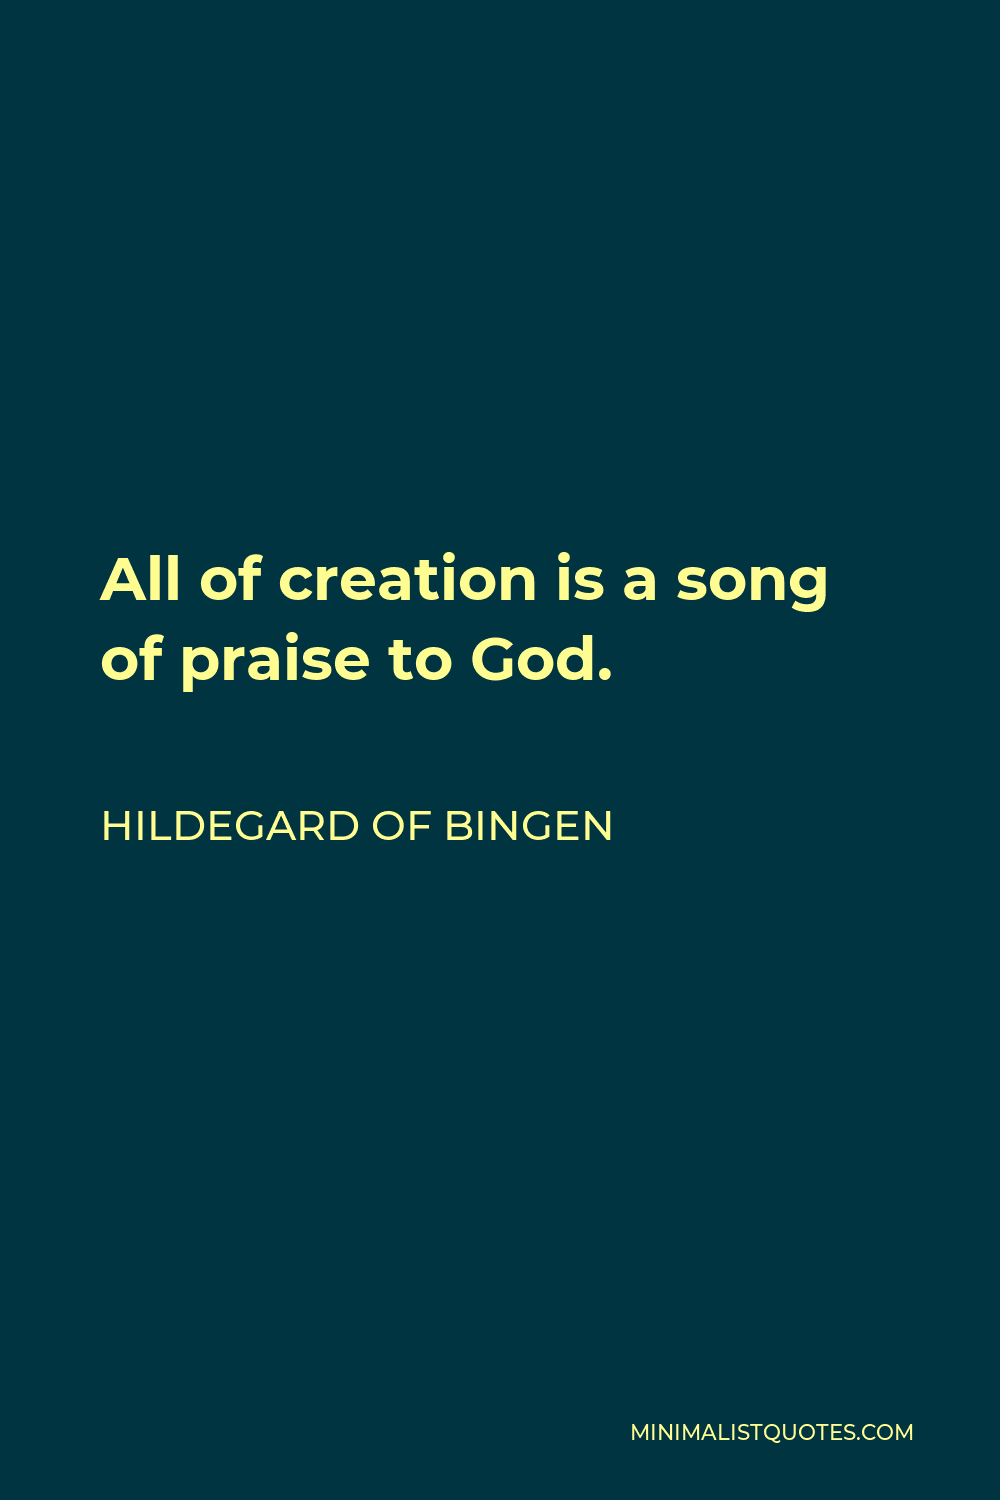 Hildegard of Bingen Quote - All of creation is a song of praise to God.